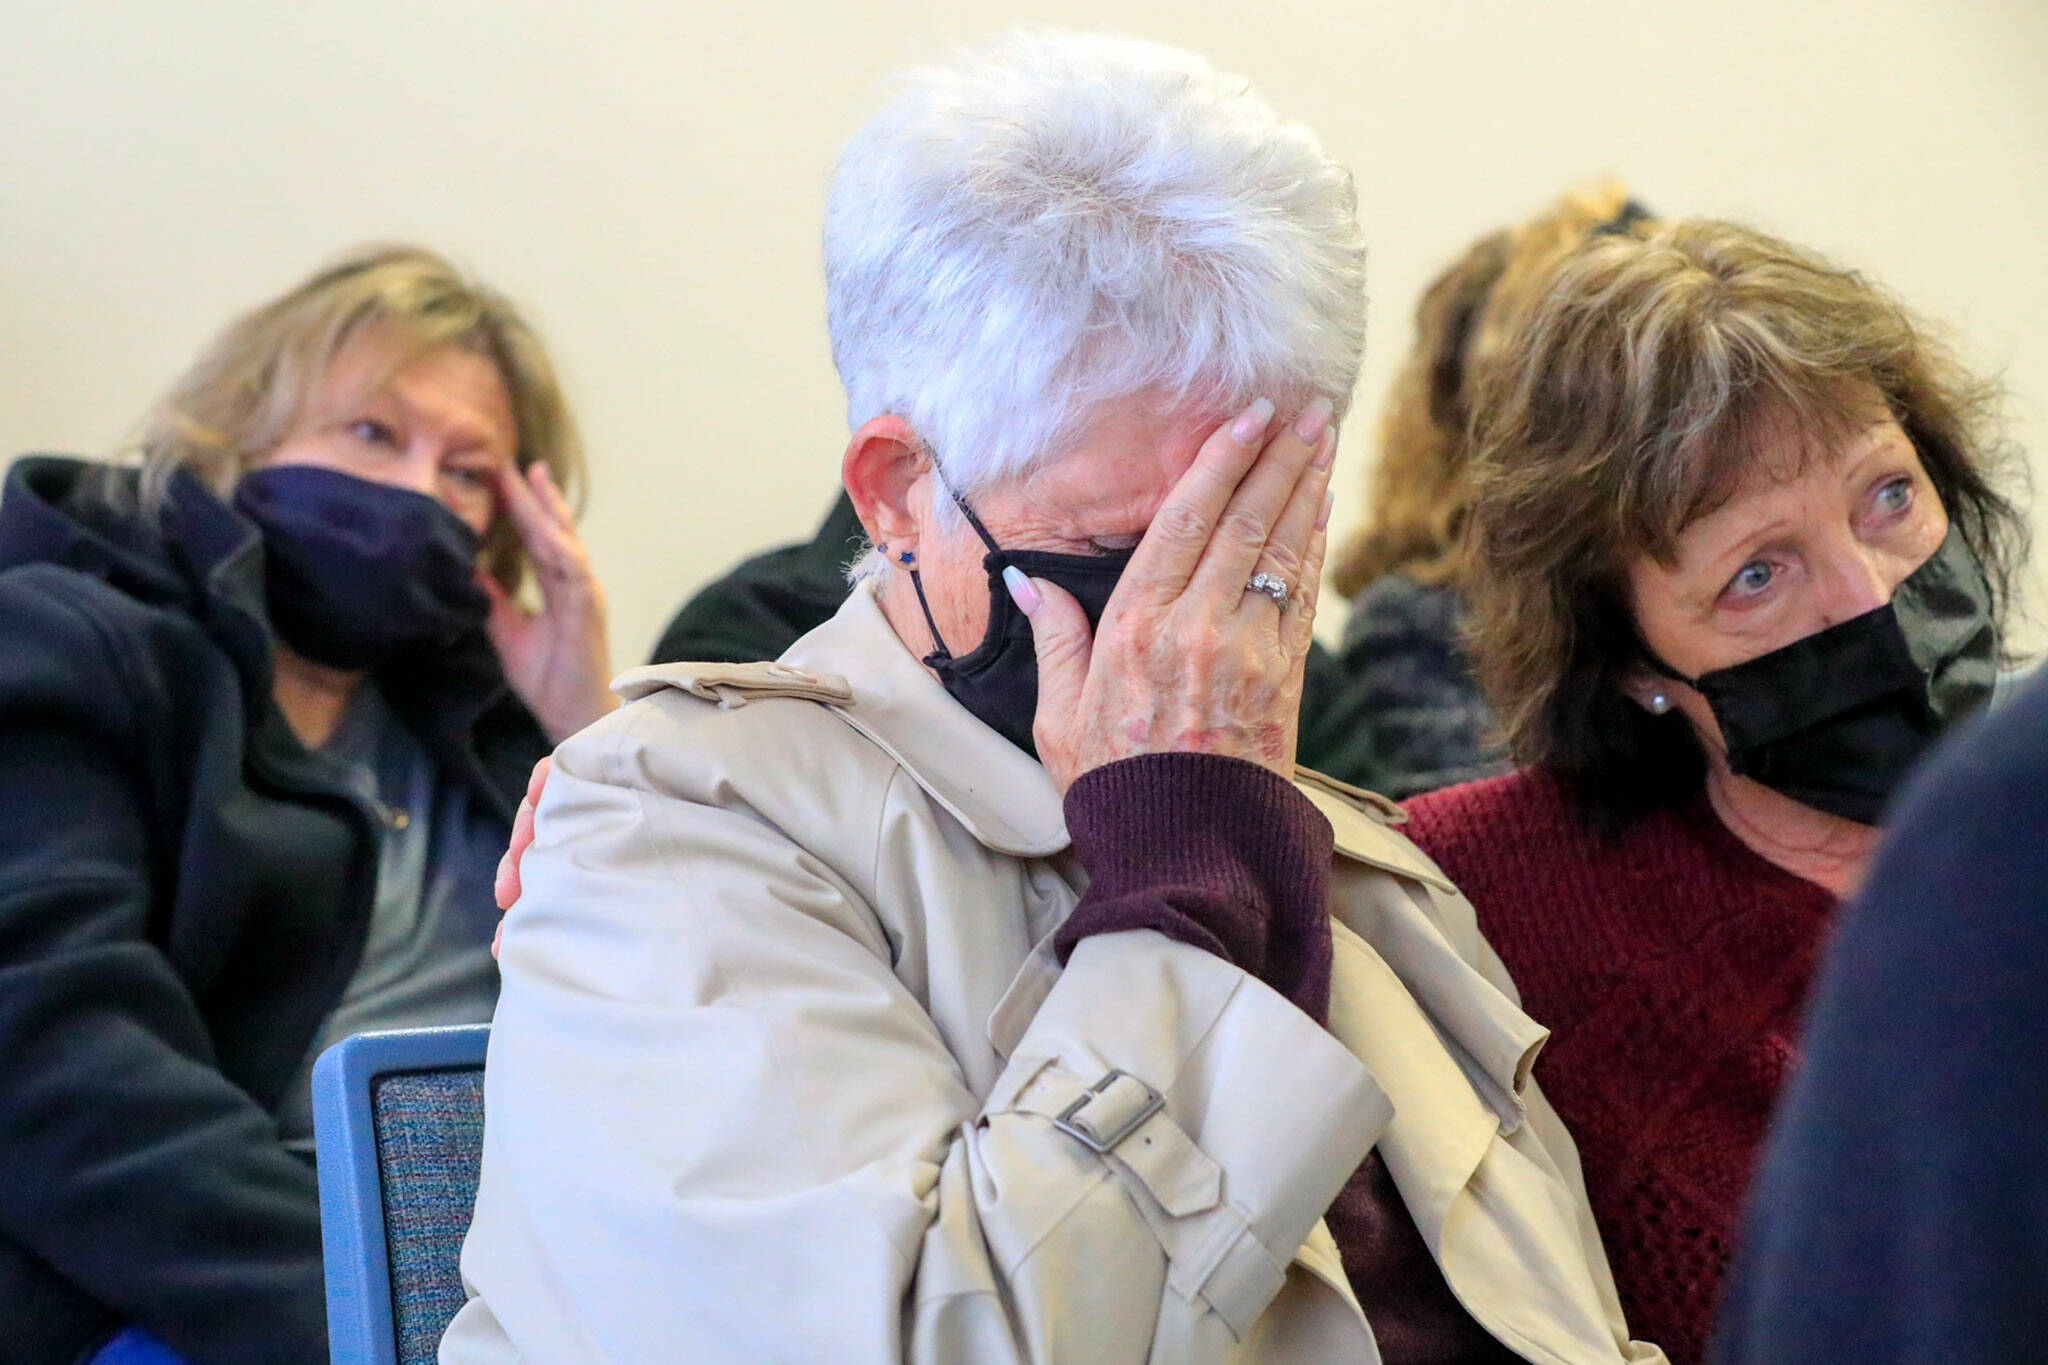 Lynn Sass (center) and Kim Cutts (right) listen as the judge hands down the sentence of Mark Abrahamson on Monday at the Snohomish County Superior Courthouse in Everett. (Kevin Clark / The Herald)